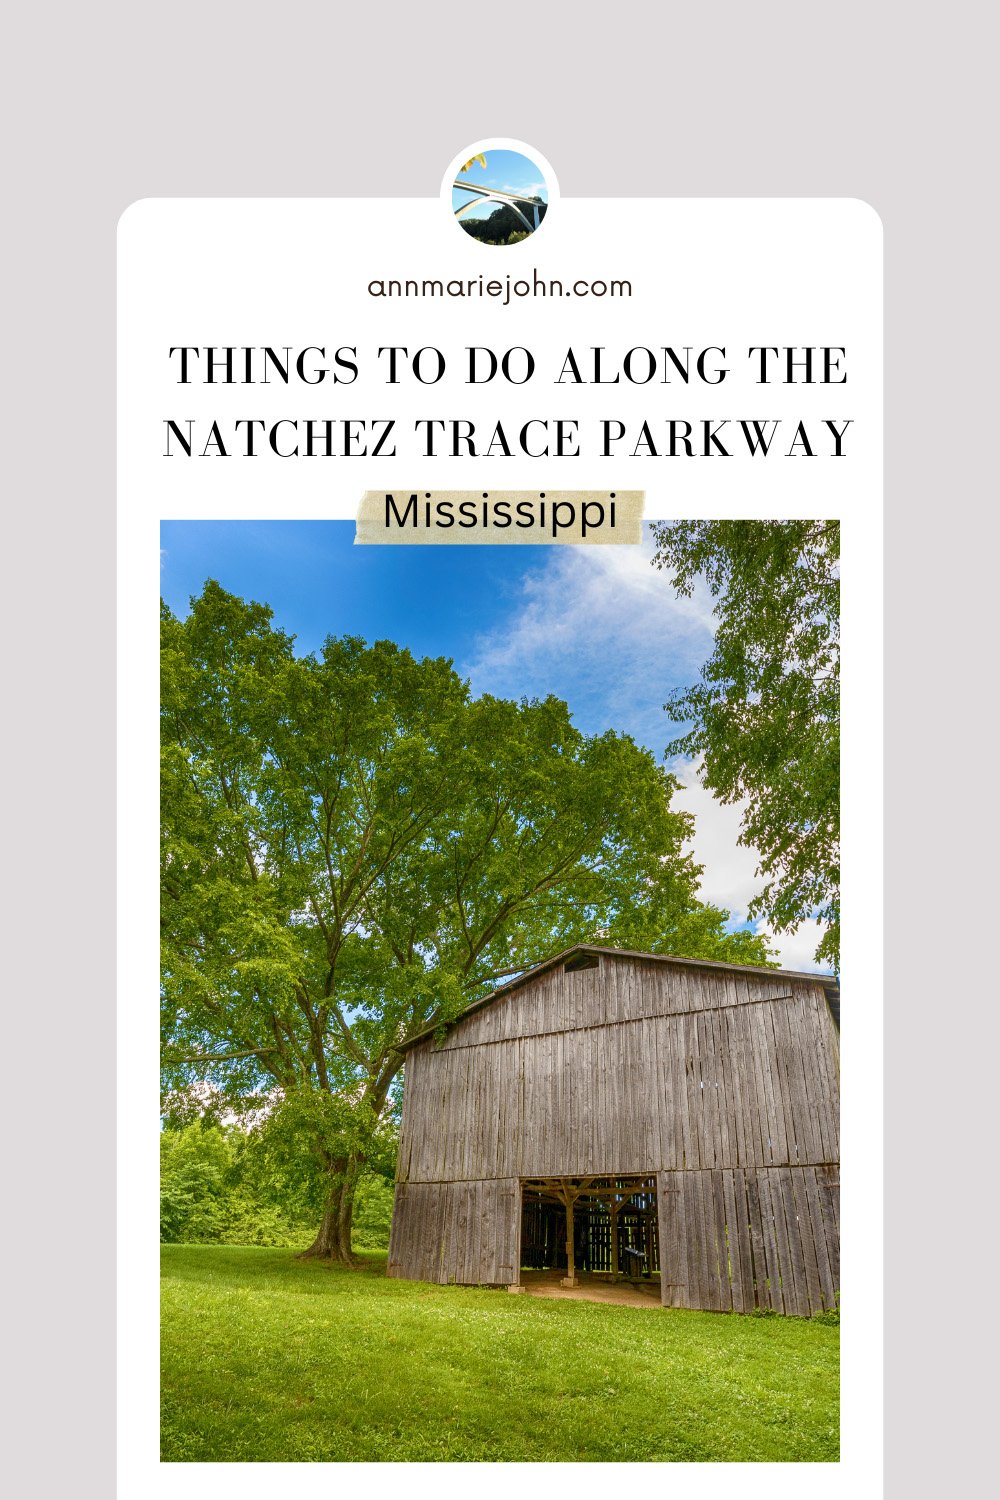 Things to do along the Natchez Trace Parkway